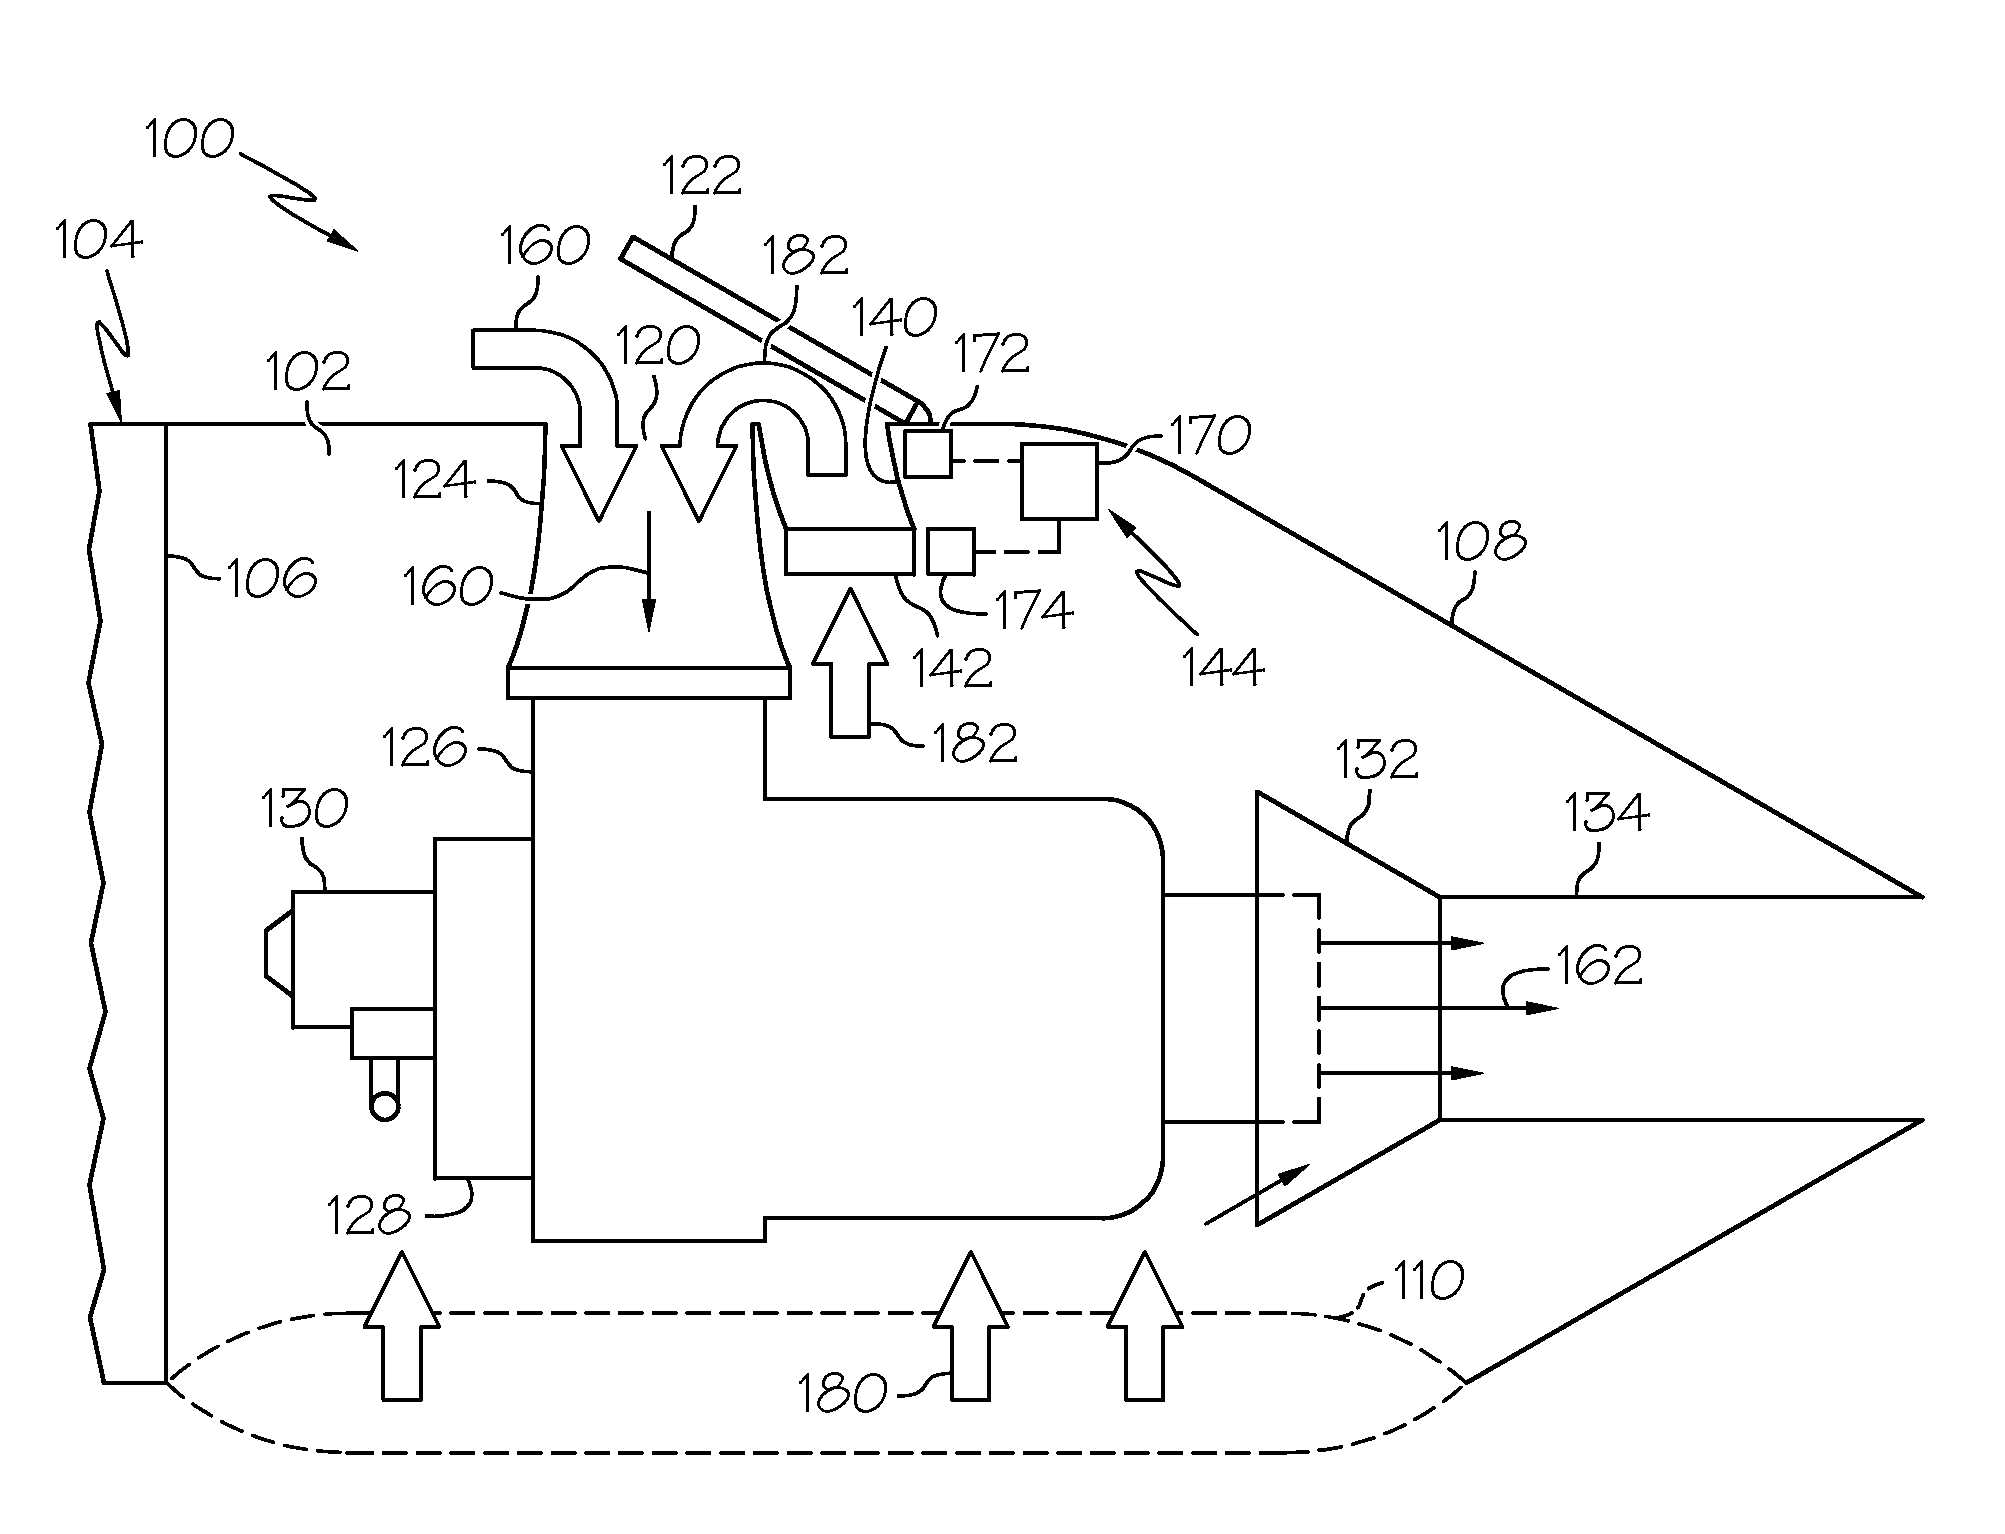 Thermal management systems and methods for auxiliary power units